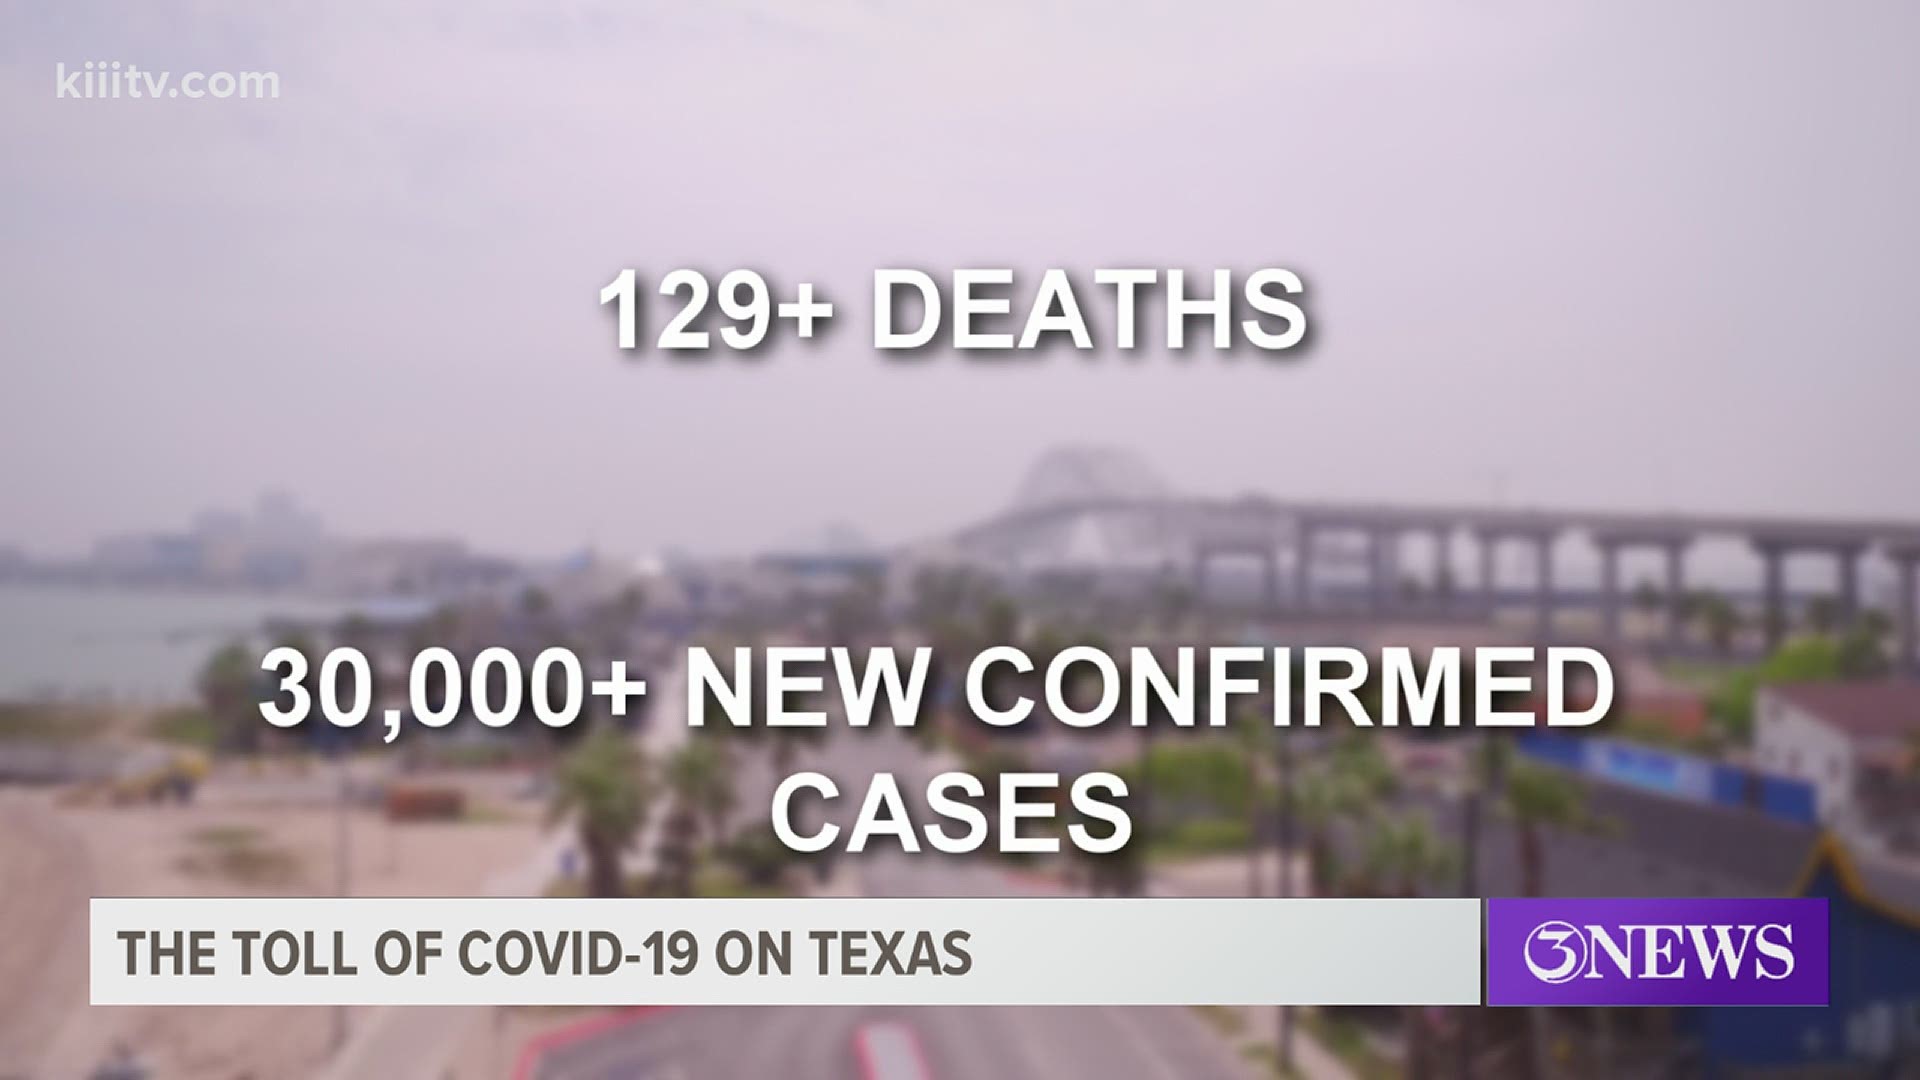 In the recent weeks the number of new cases for Nueces County has been in the triple digits every day.